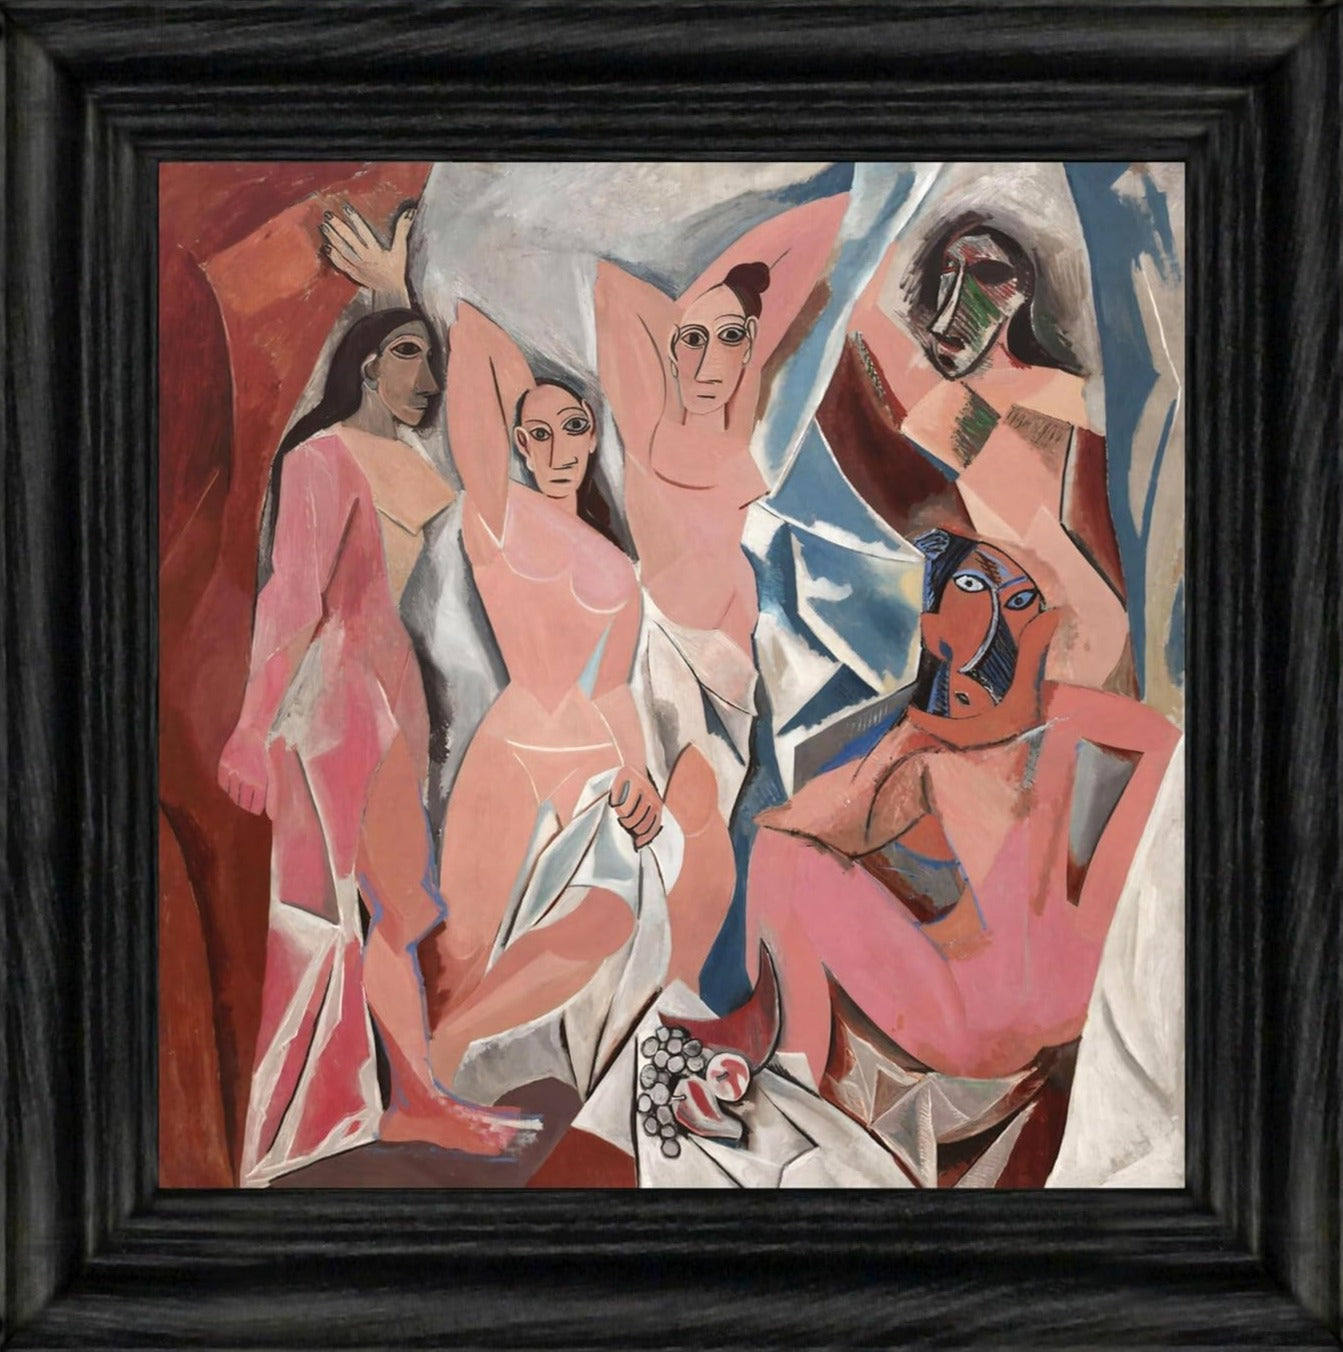 Lost Cabin Les Demoiselles D'Avignon 1907 by Pablo Picasso | Canvas Black Flat Frame | Fine Artwork Painting Reproduction | Framed Wall Art Decor Poster | Image: 16X16 Frame: 18X18